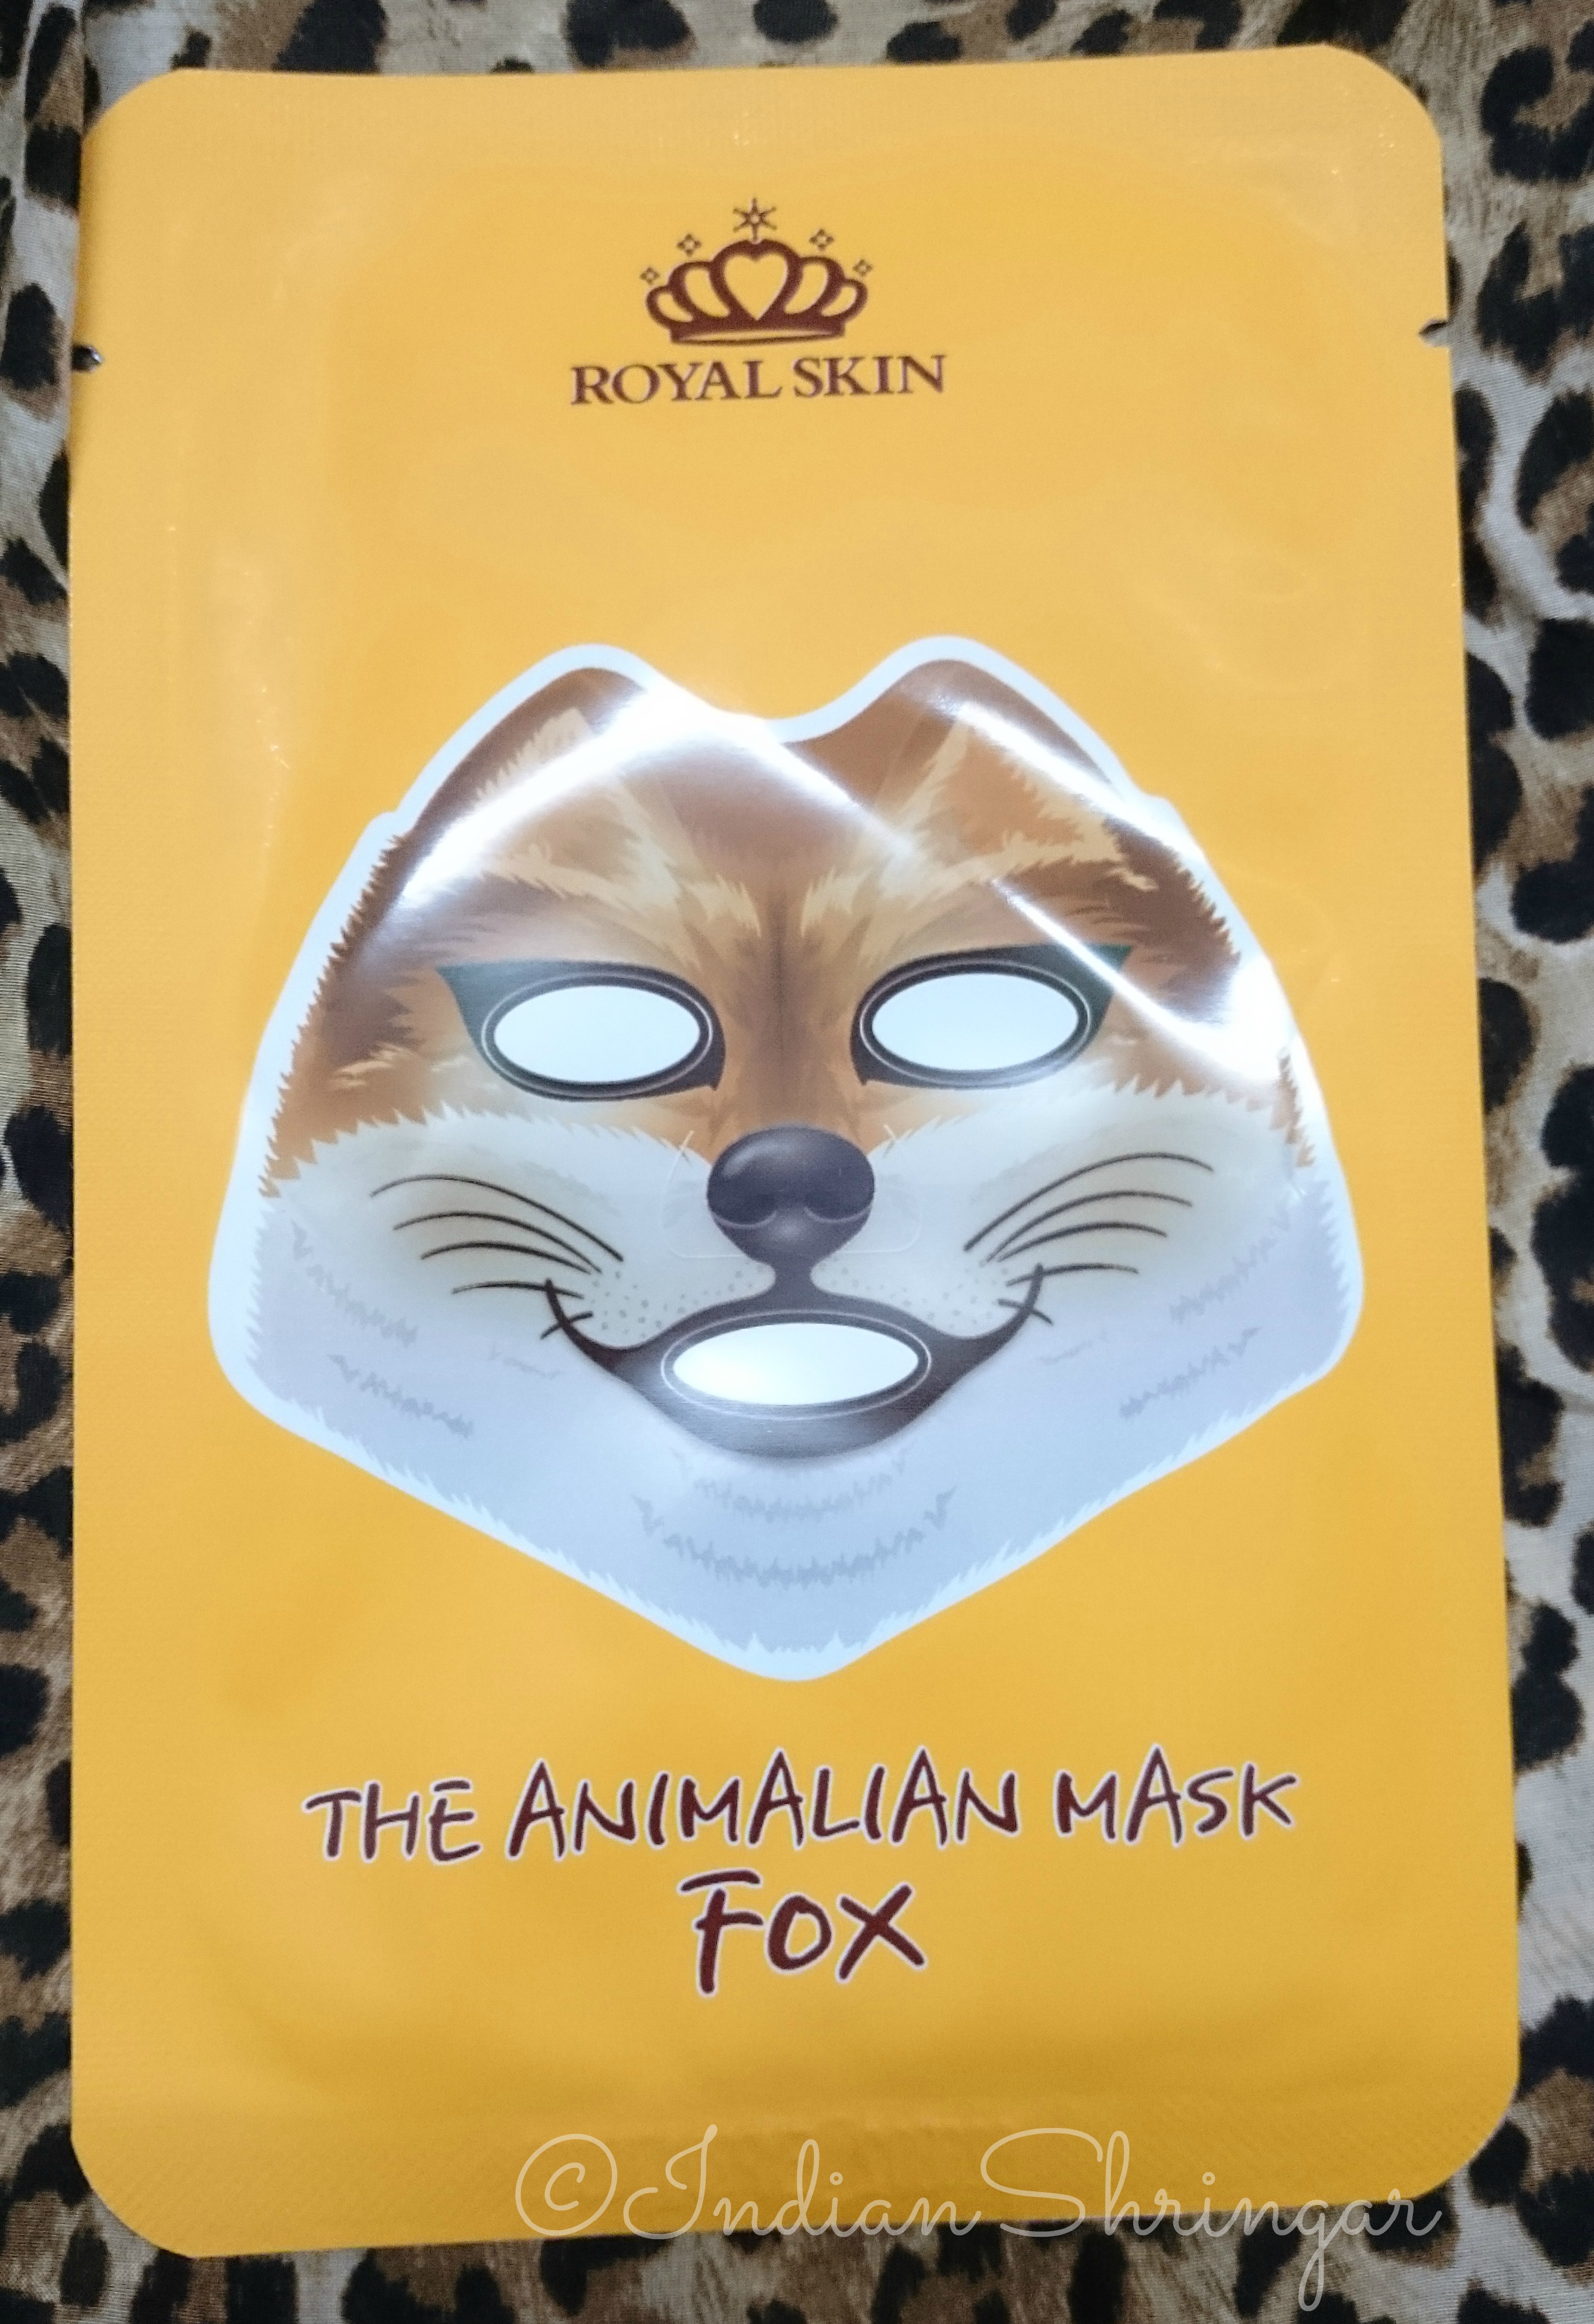 MaskGenie 10 Days In The Wild Unboxing and contents